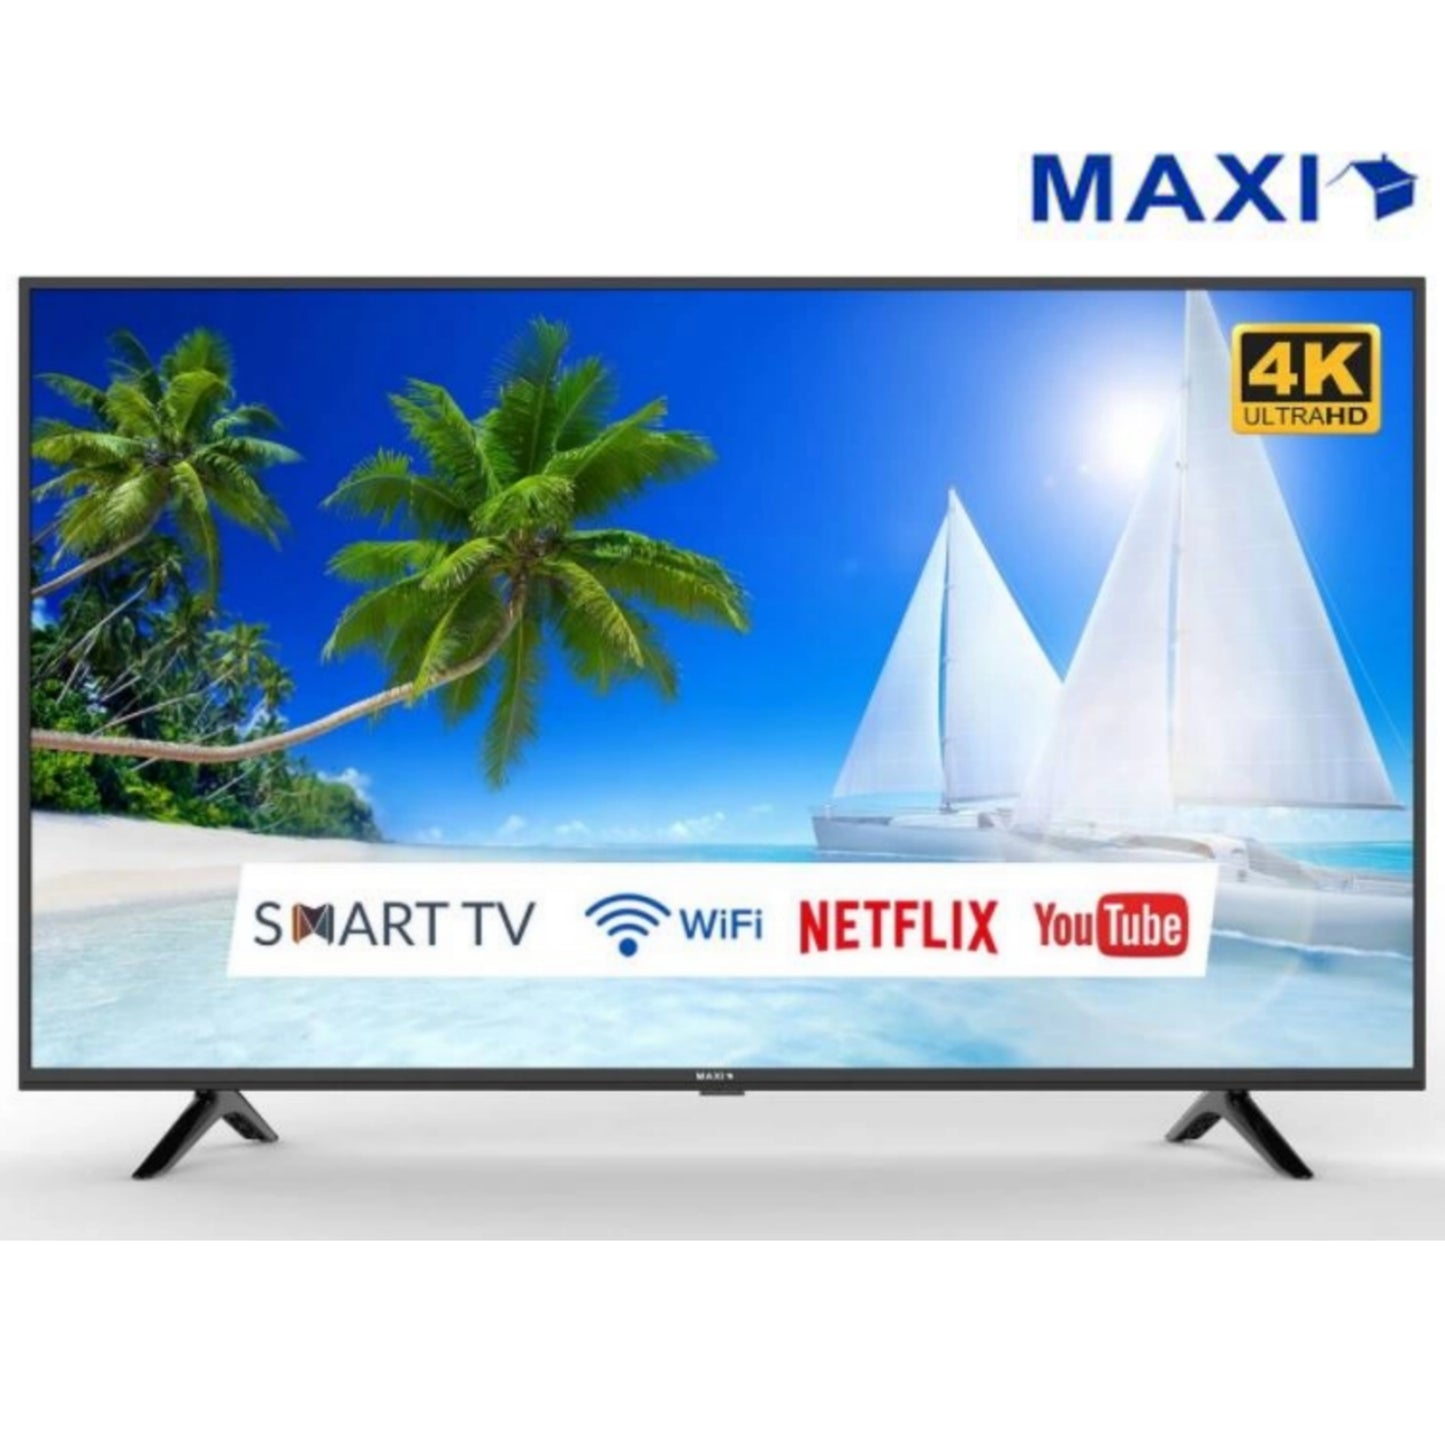 Maxi 50 Inch 50D2010 Smart Ultra HD LED TV + Netflix, Youtube, Miracast (Front View) - Brand New